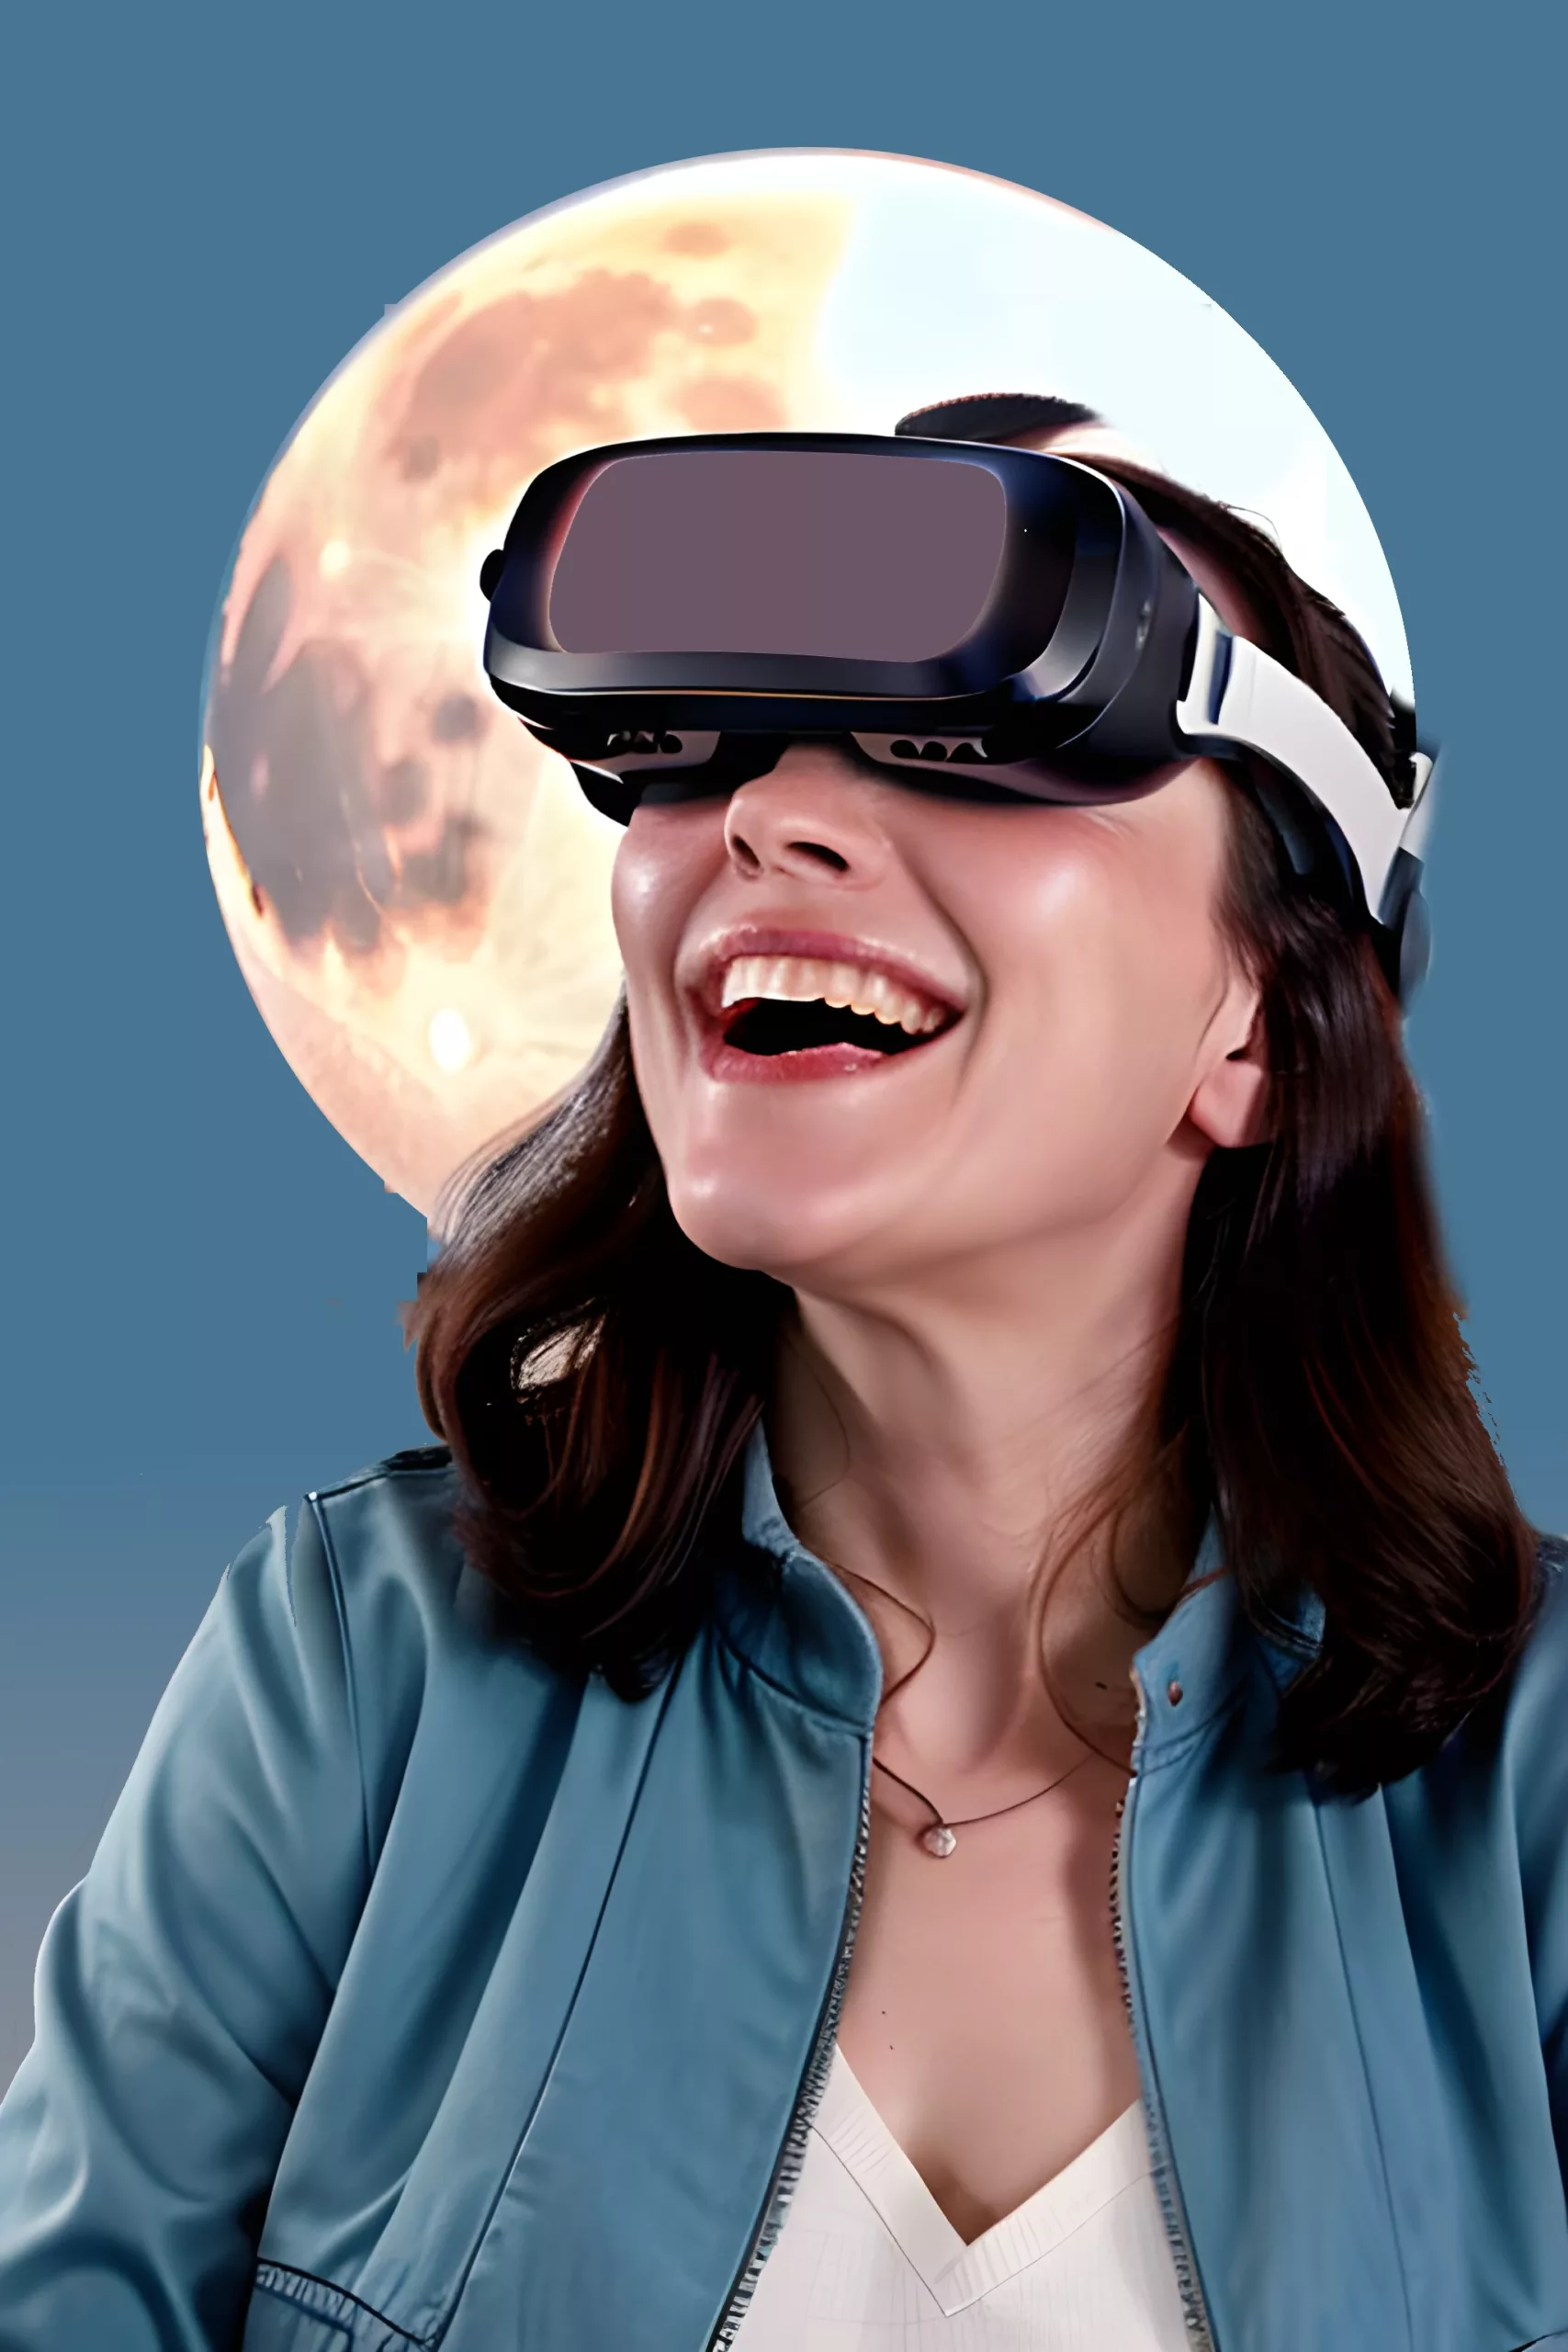 Smiling woman wearing a VR headset in front of the moon